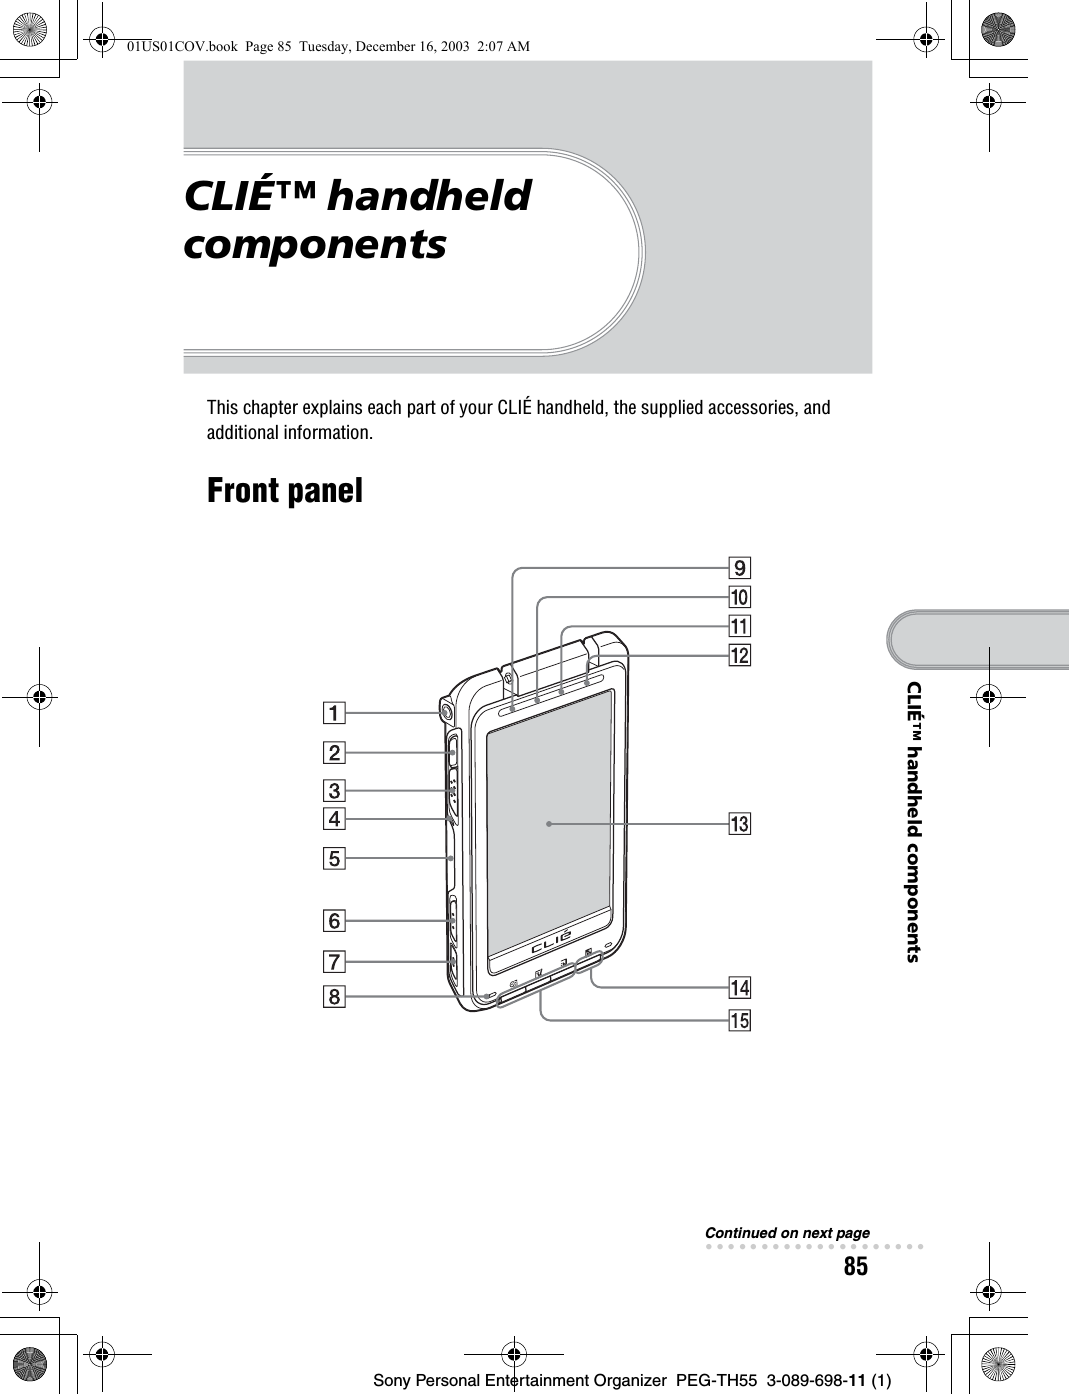 Sony Personal Entertainment Organizer  PEG-TH55  3-089-698-11 (1)85CLIÉ™ handheld componentsCLIÉ™ handheld componentsThis chapter explains each part of your CLIÉ handheld, the supplied accessories, and additional information.Front panelContinued on next page• • • • • • • • • • • • • • • • • • • •01US01COV.book  Page 85  Tuesday, December 16, 2003  2:07 AM